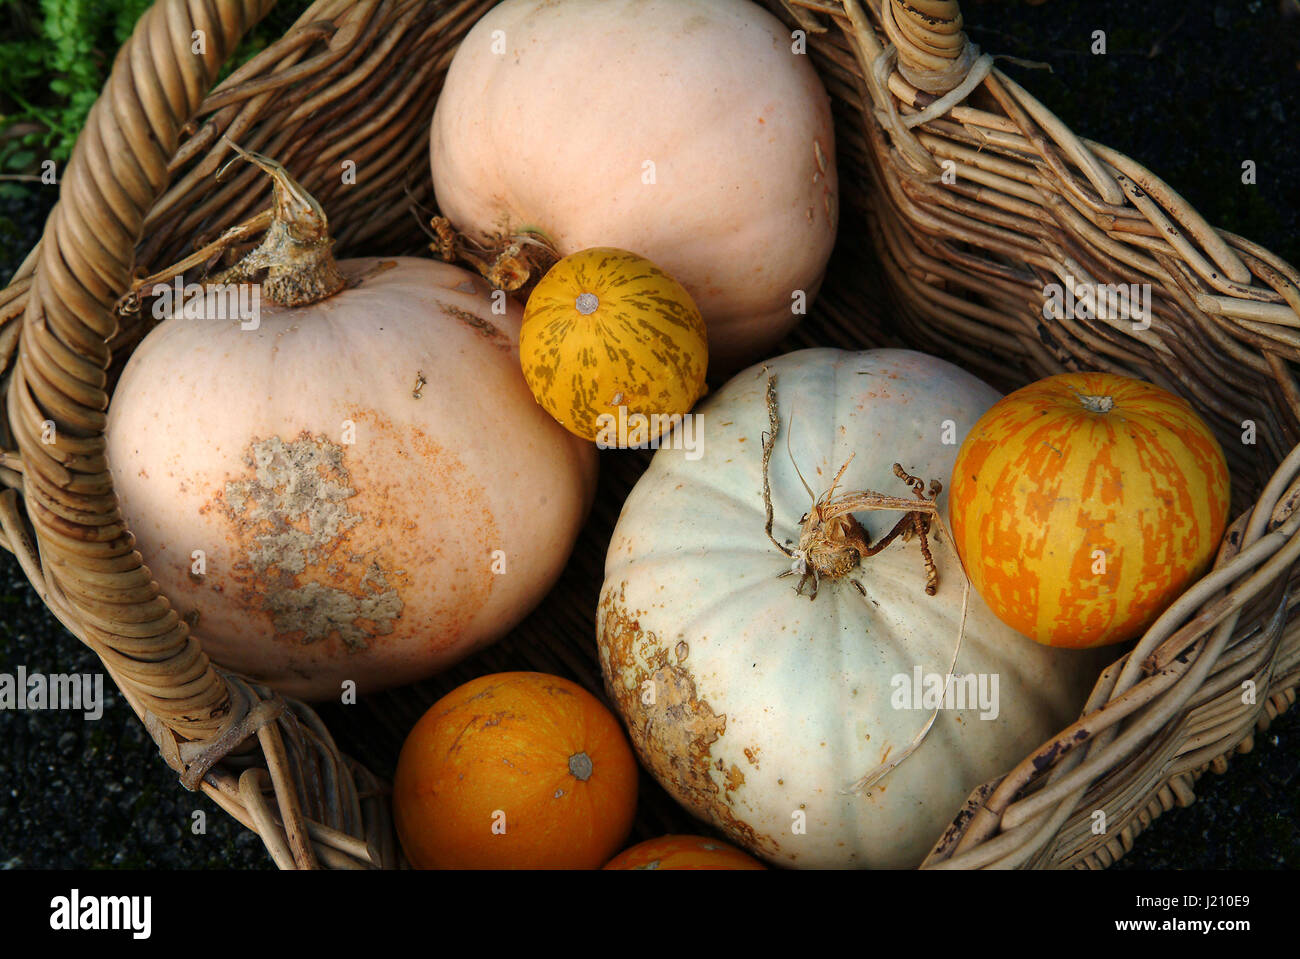 A selection of squashes/pumpkins in a basket Stock Photo